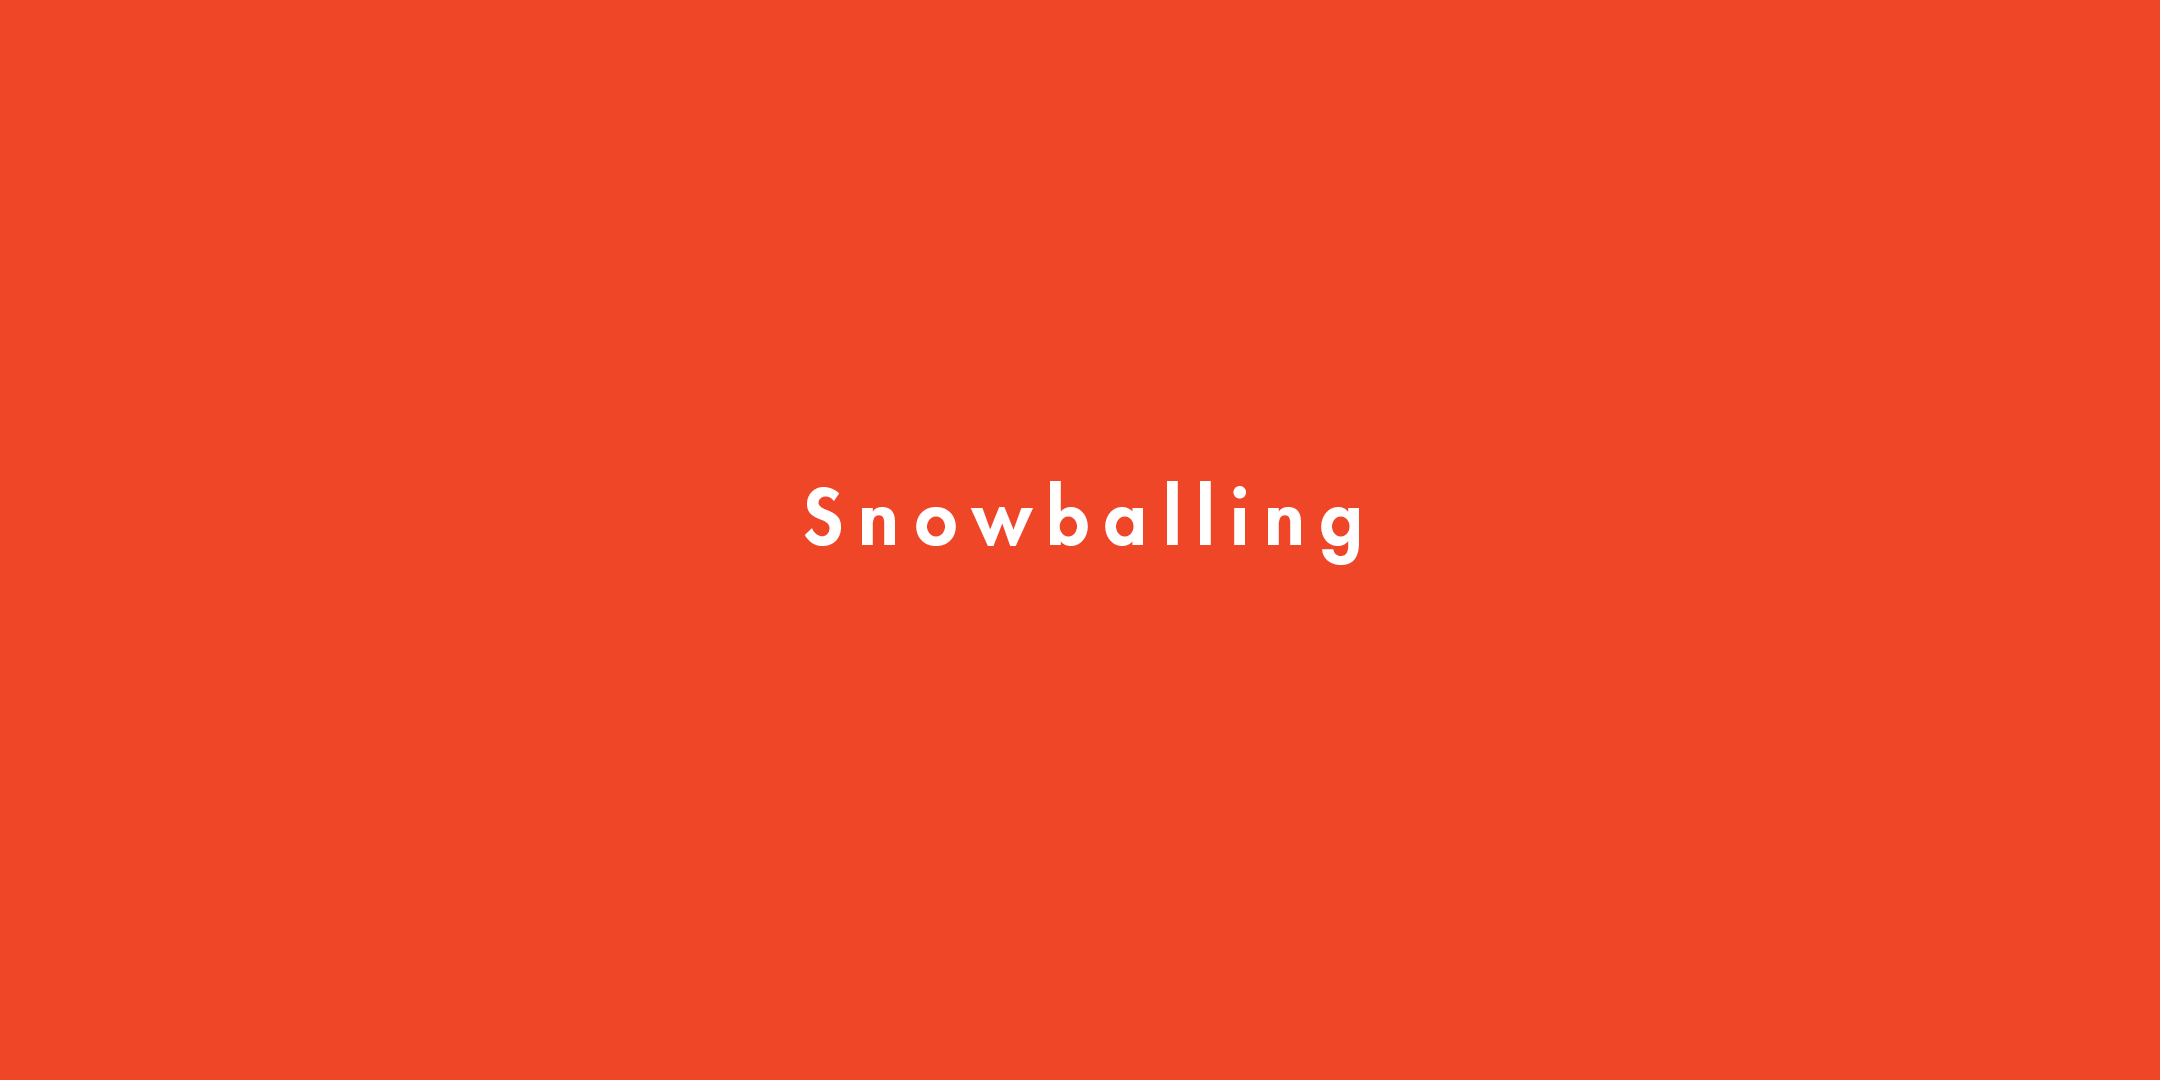 What Is Snowballing pic